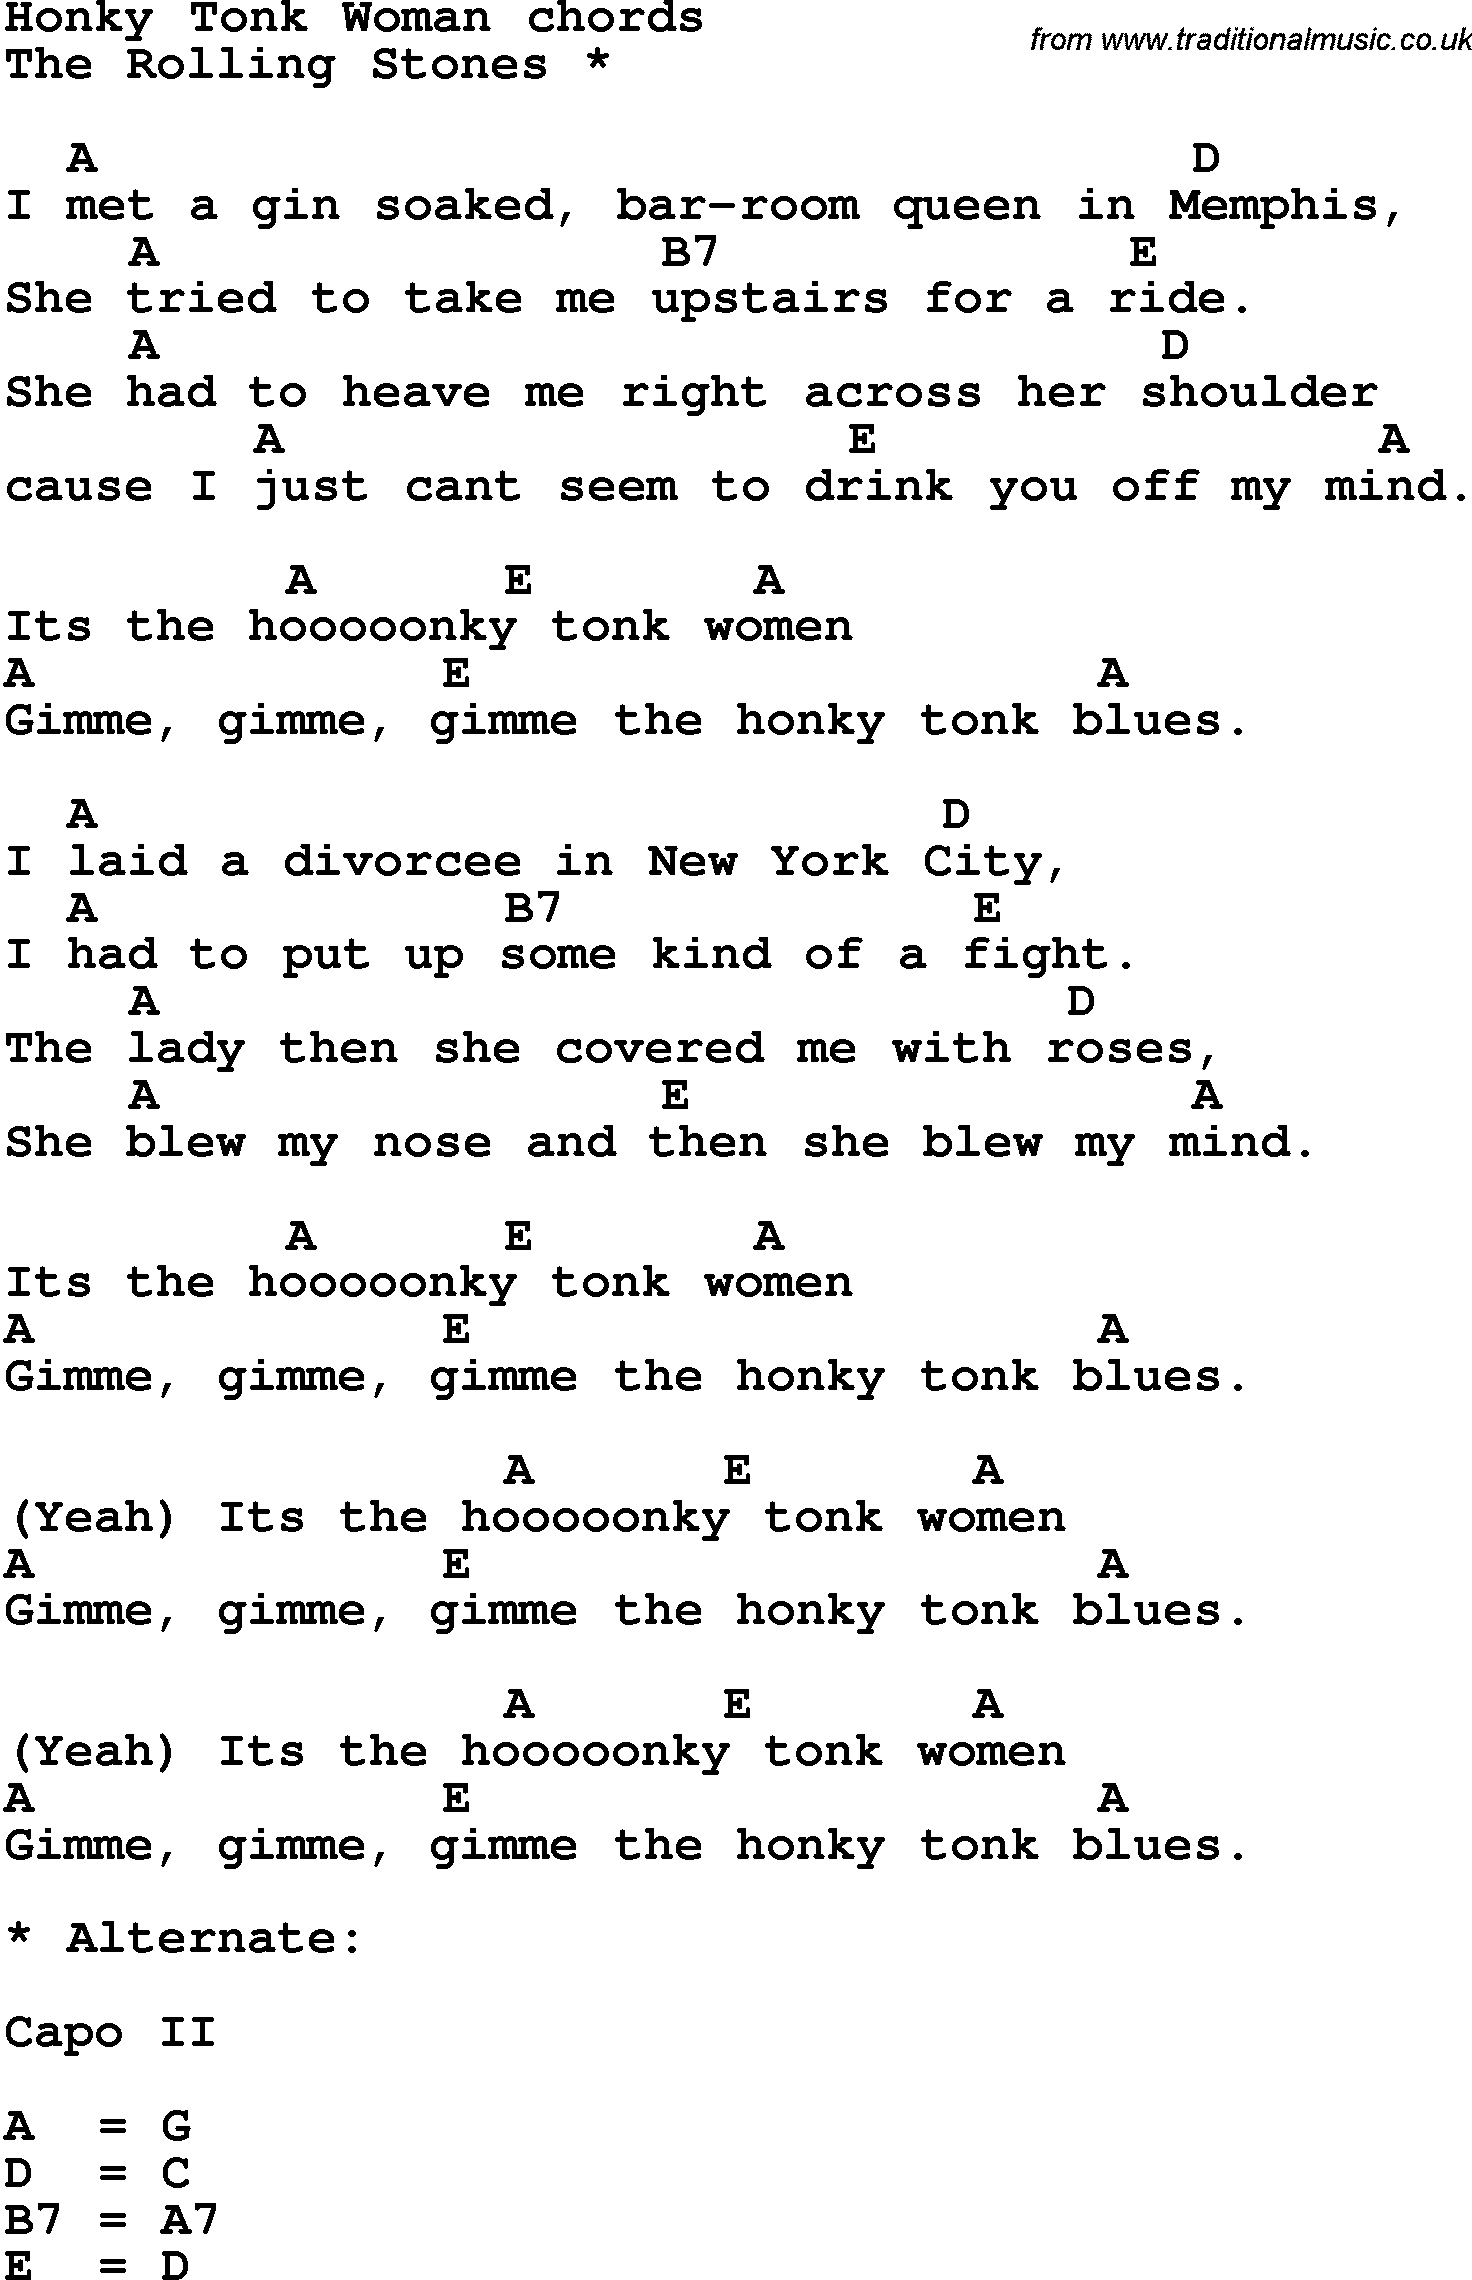 Song Lyrics with guitar chords for Honky Tonk Woman